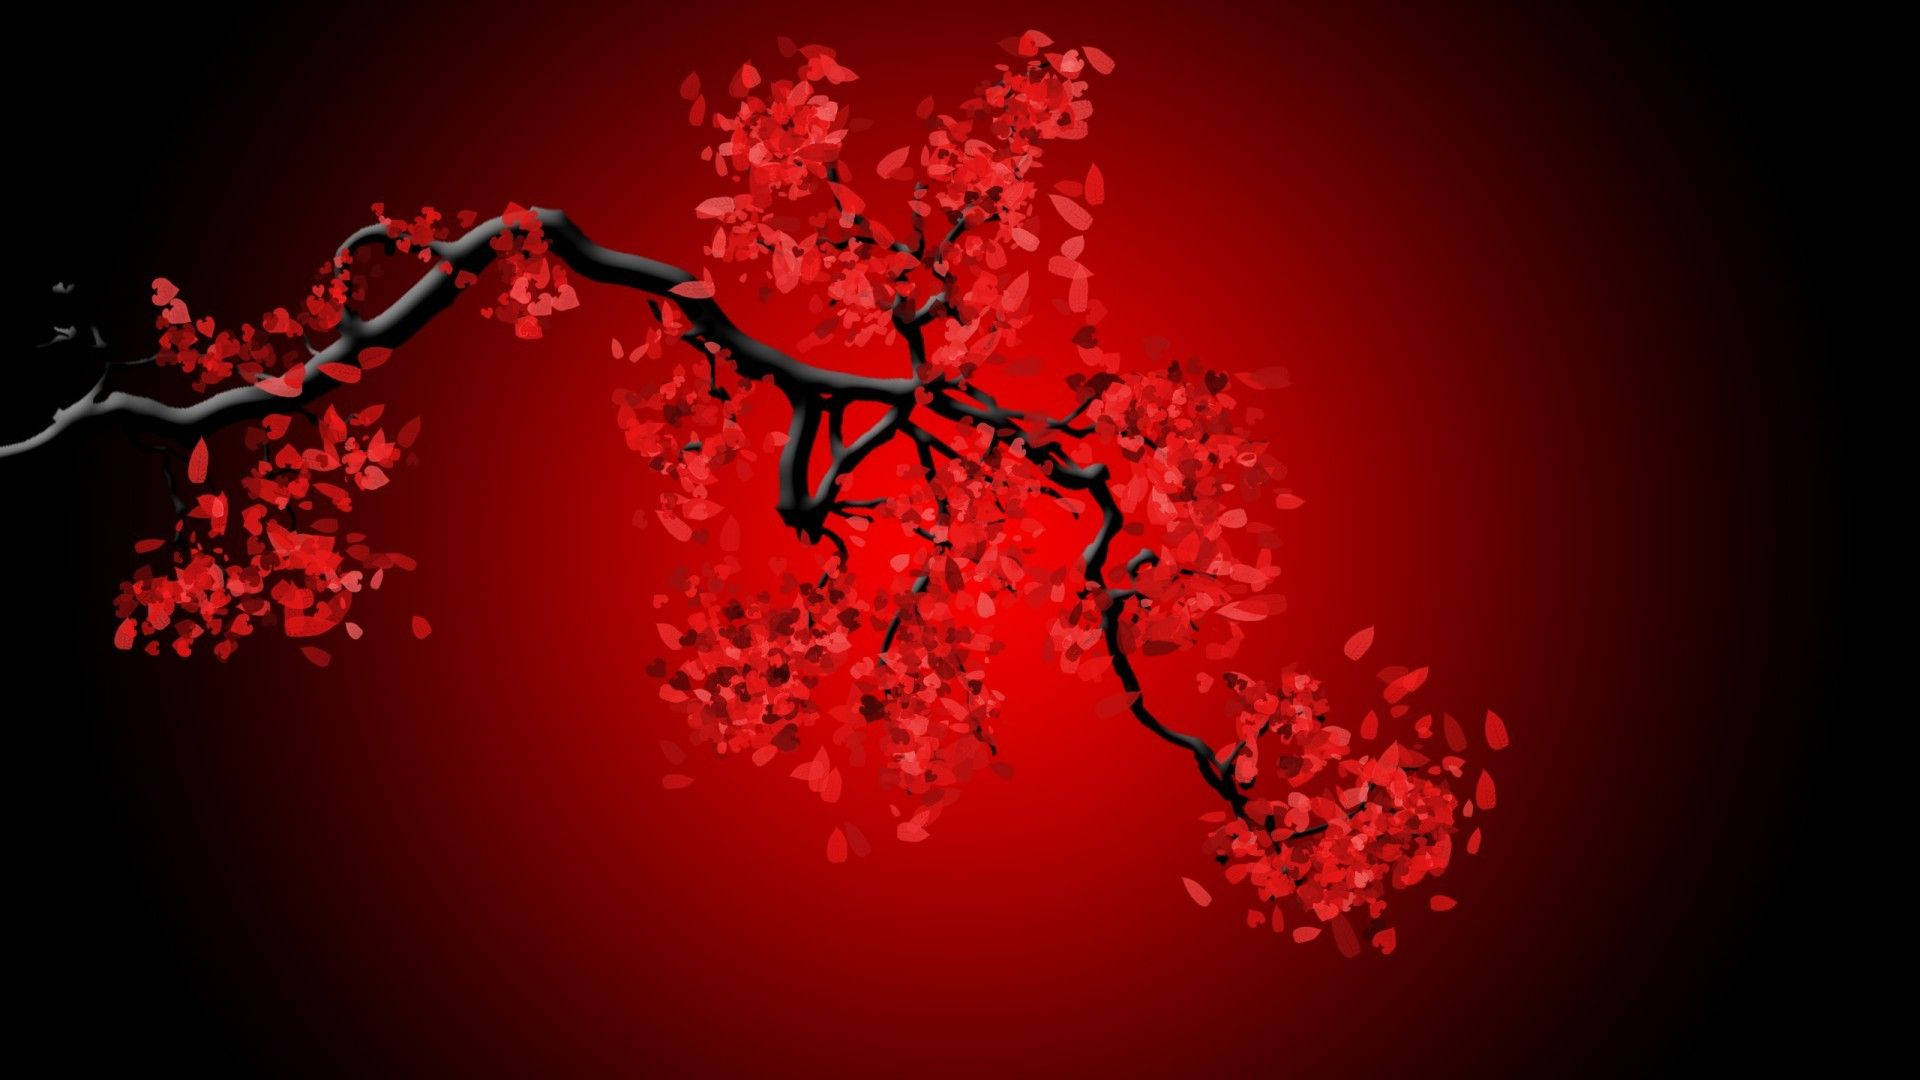 Cool Red Cherry Blossom Background